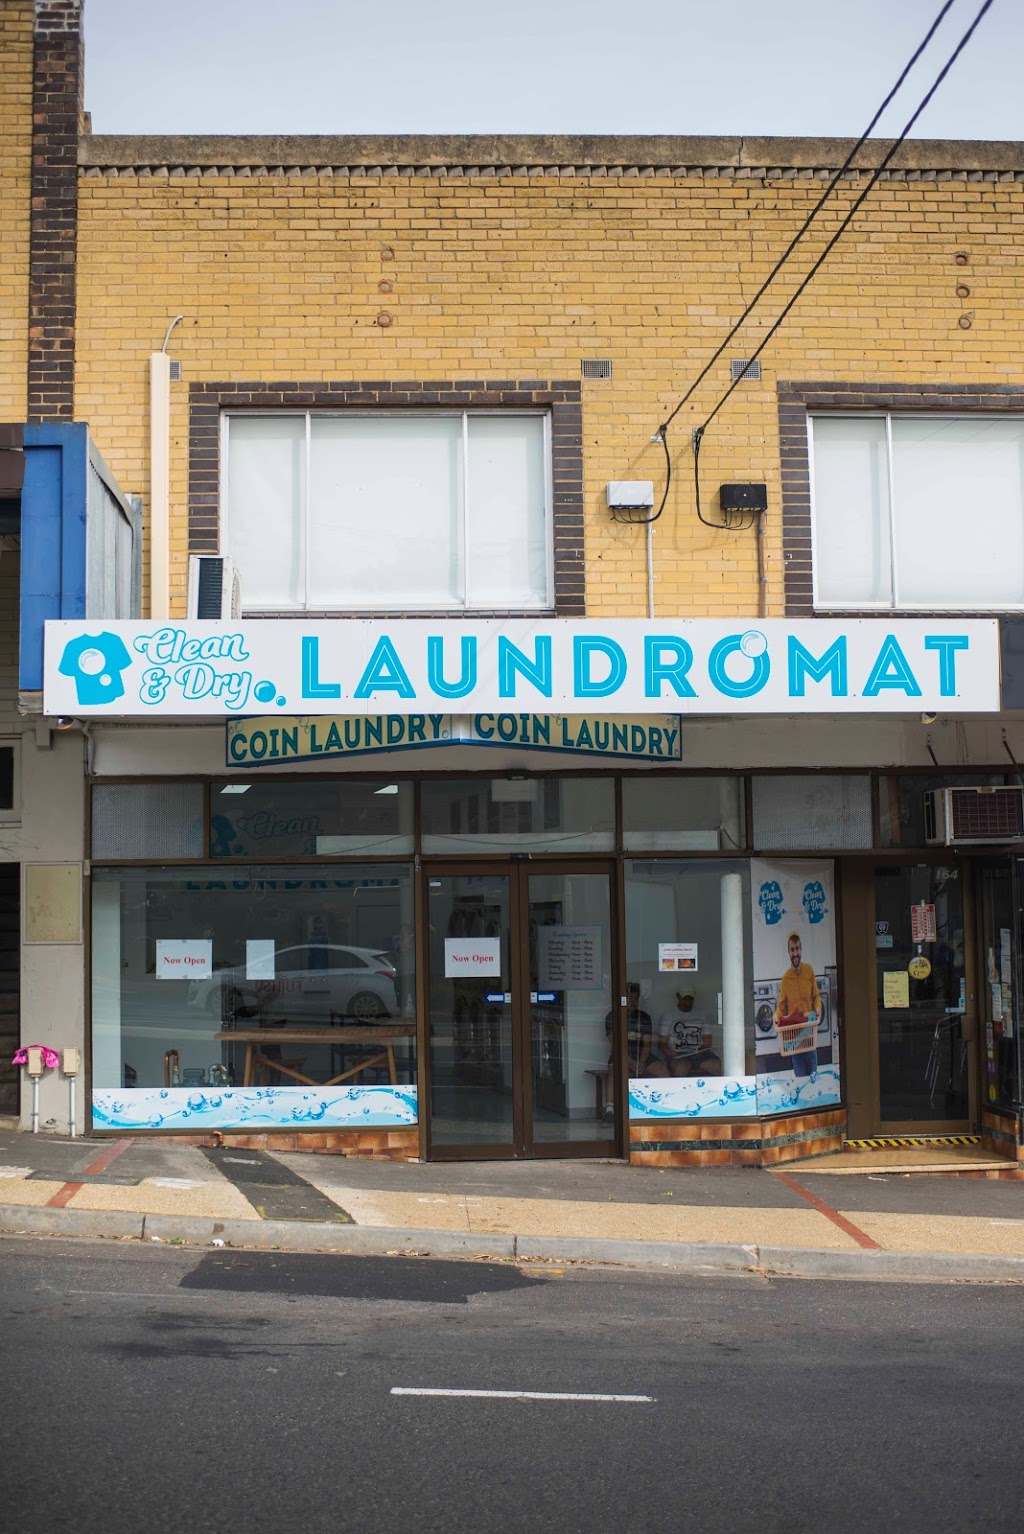 Clean and Dry Laundromat | laundry | 164a Elgar Rd, Box Hill South VIC 3128, Australia | 0433548901 OR +61 433 548 901